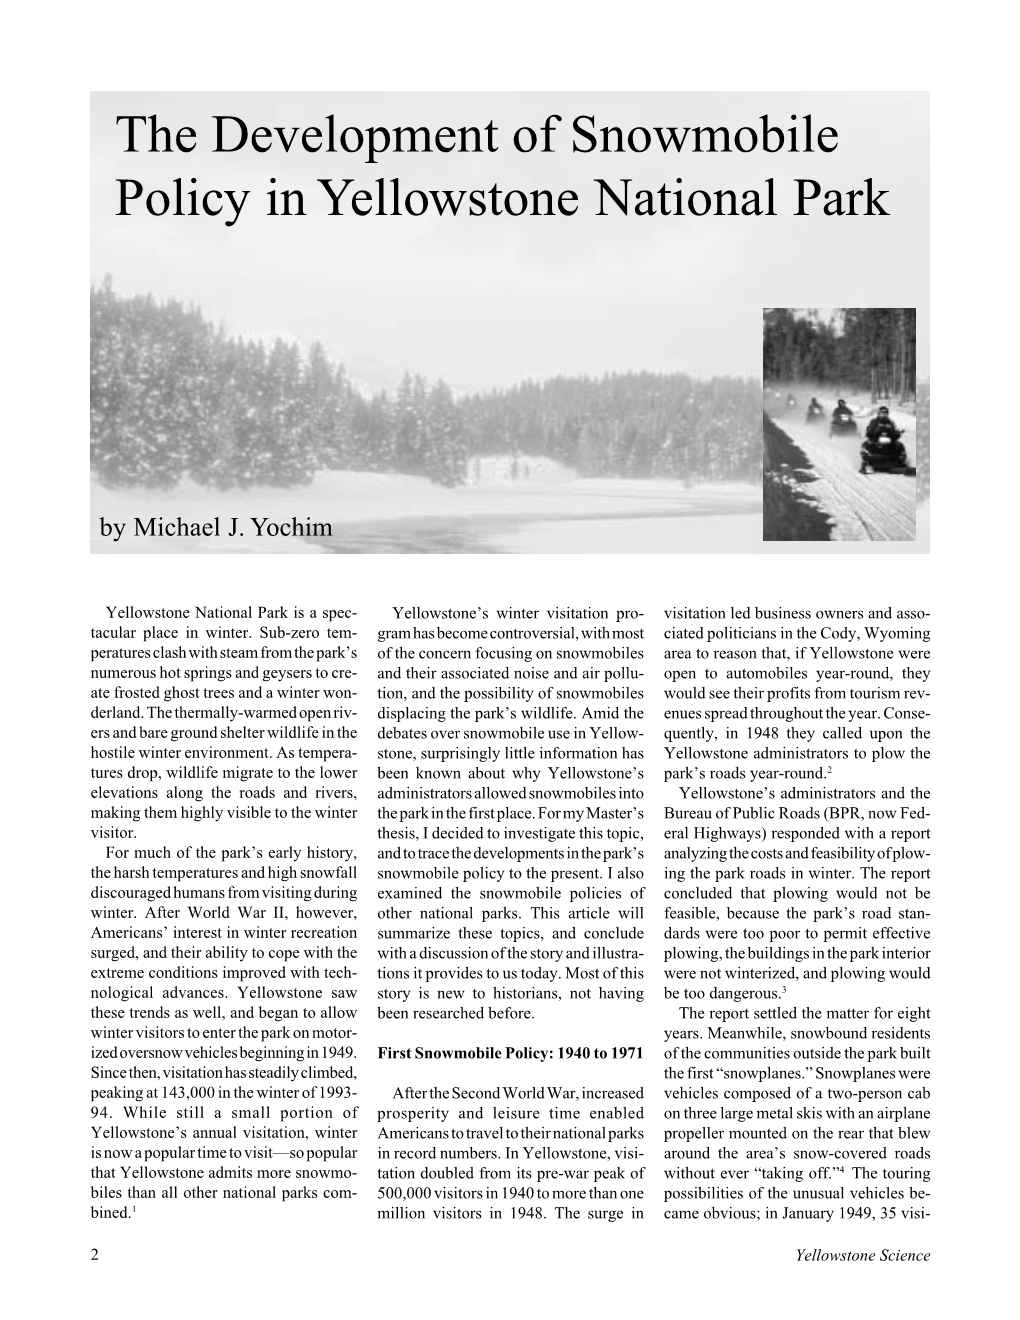 The Development of Snowmobile Policy in Yellowstone National Park